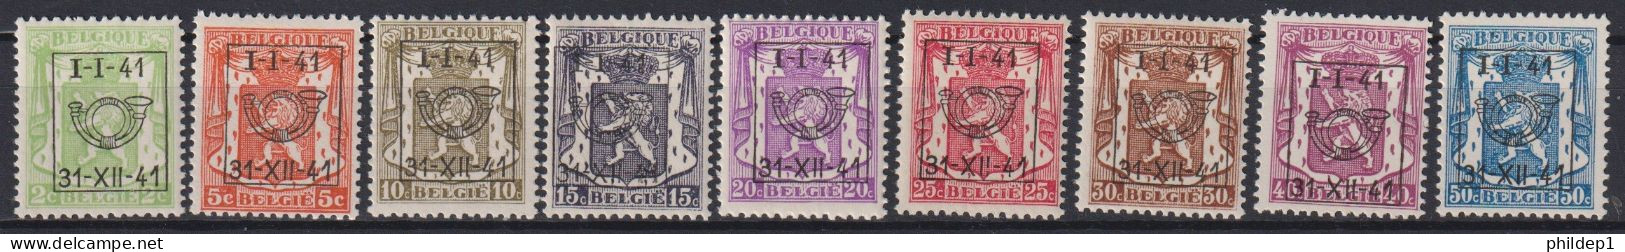 Belgique: COB N° PRE455/63 **, MNH, Neuf(s). TTB !!! Voir Le(s) Scan(s) !!! - Typo Precancels 1936-51 (Small Seal Of The State)